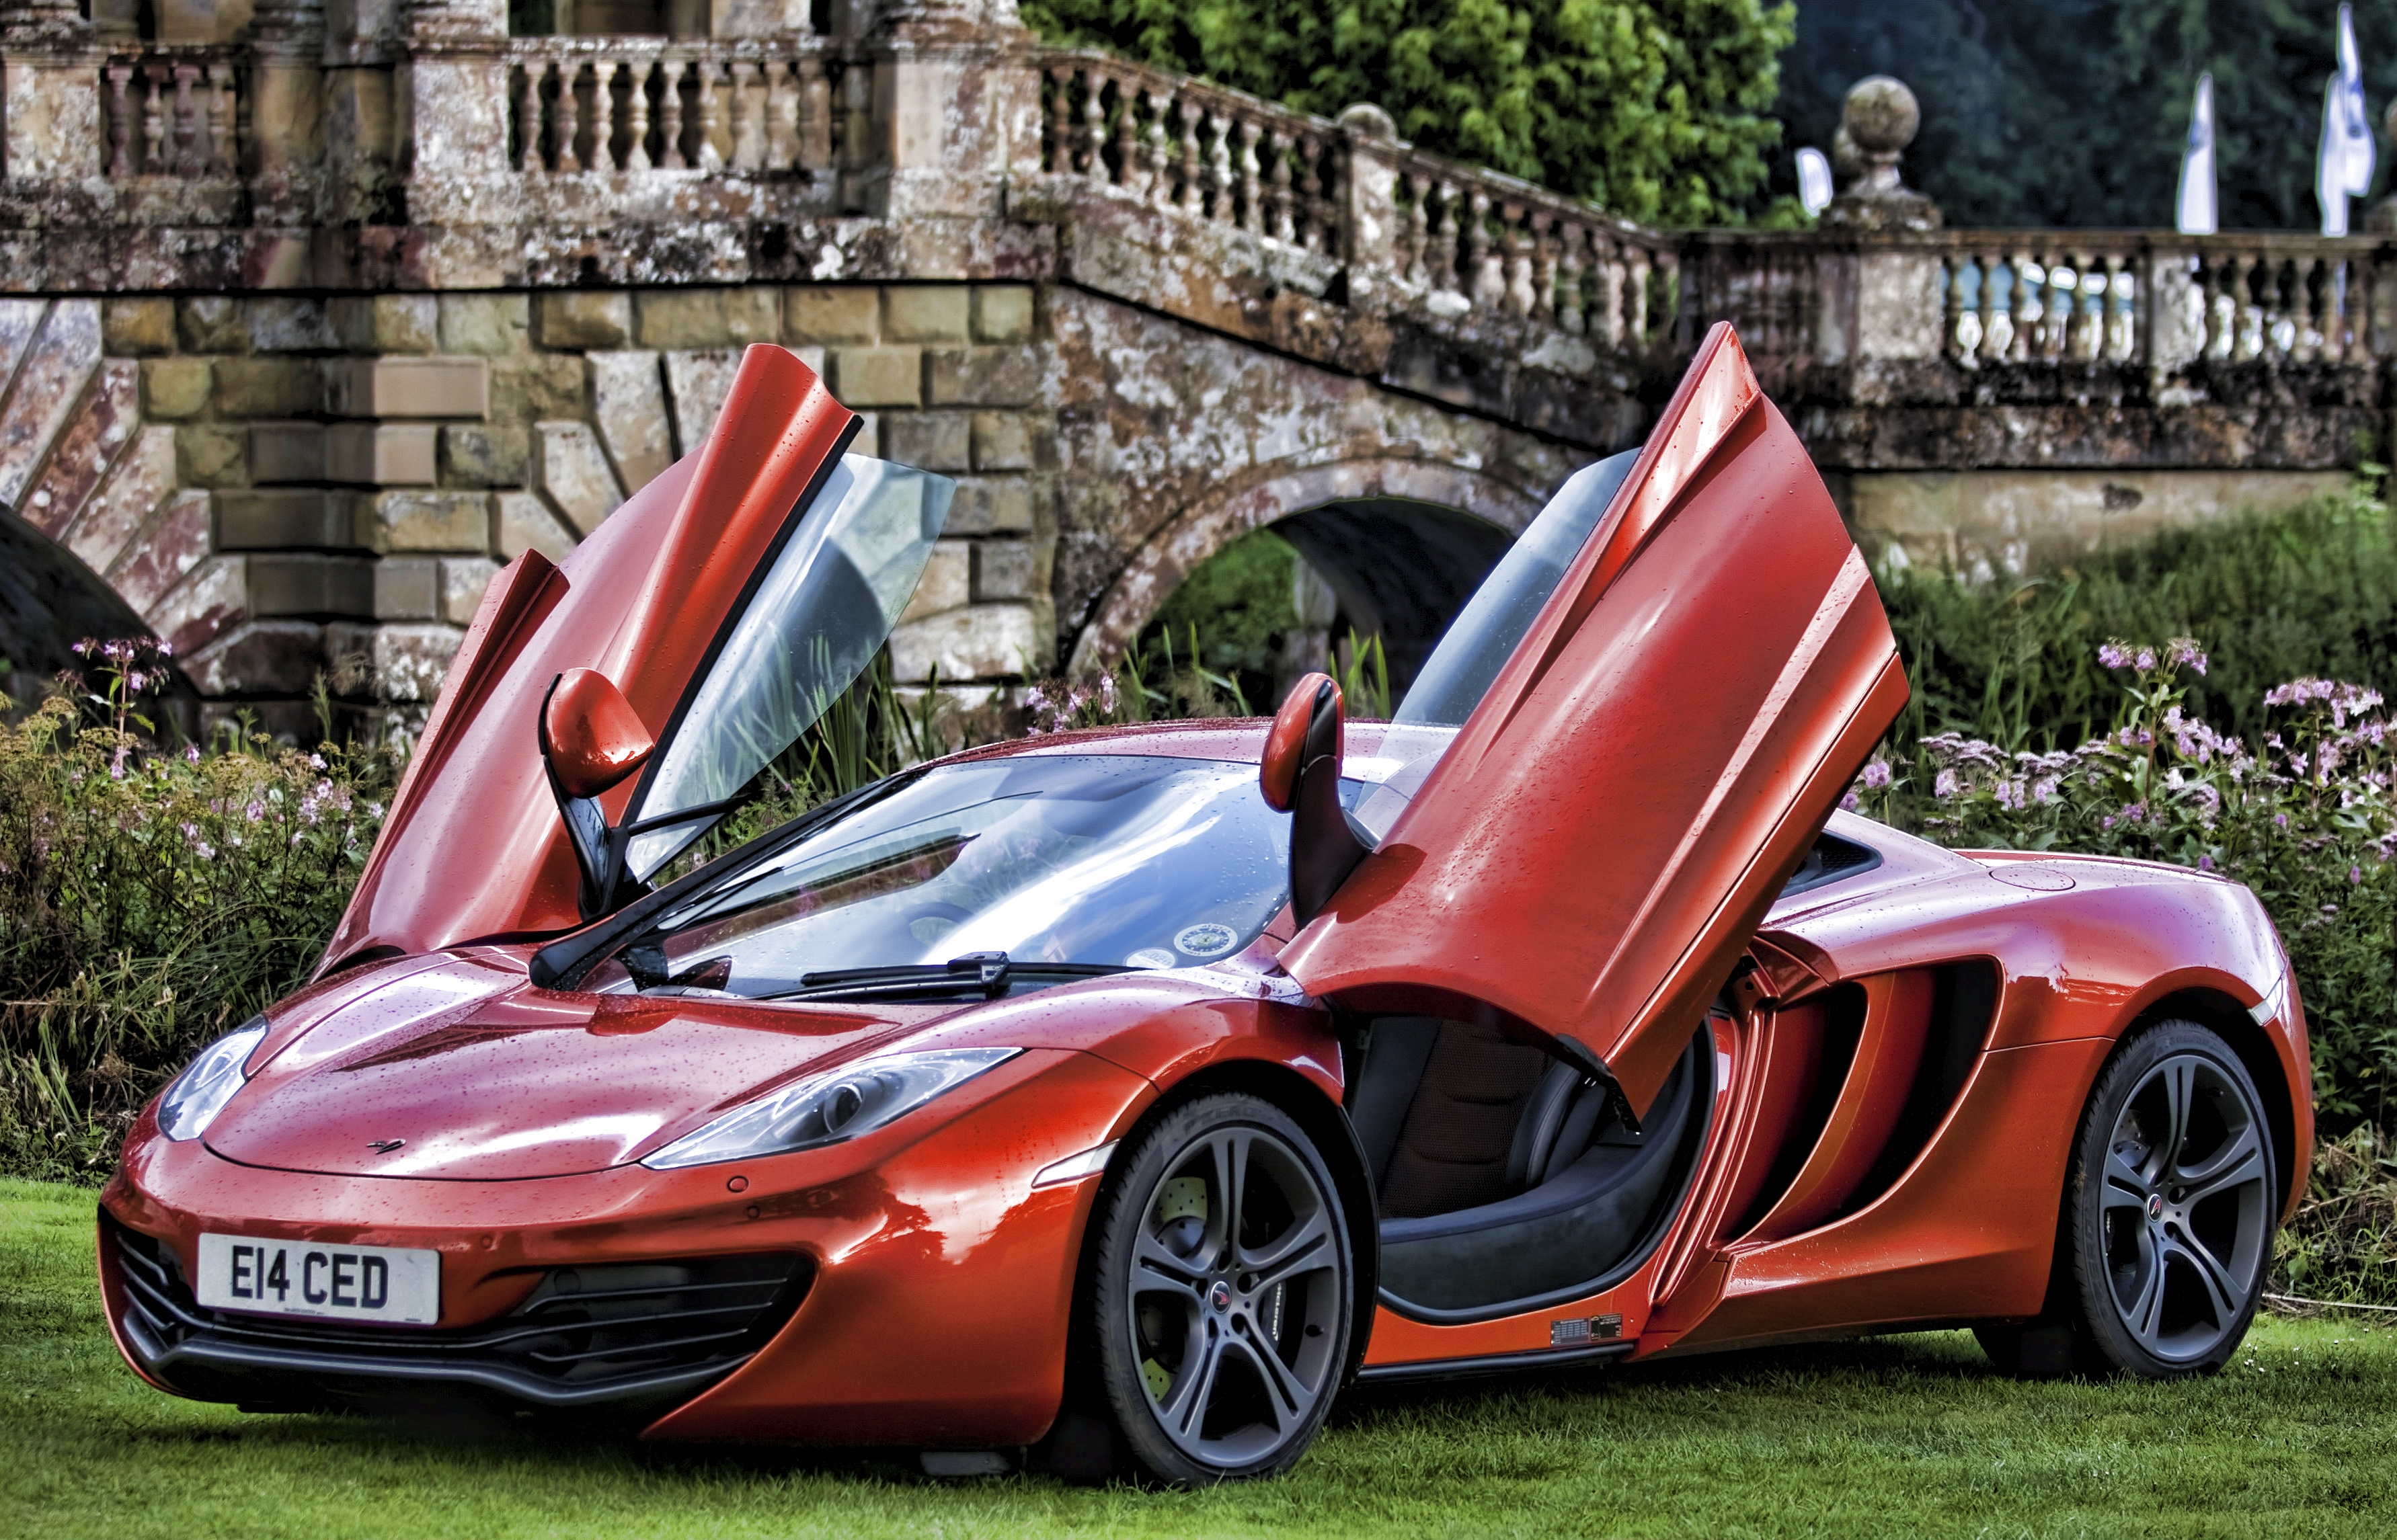 115199 Screensavers and Wallpapers Stylish for phone. Download grass, mclaren, cars, stylish, mp4-12c pictures for free